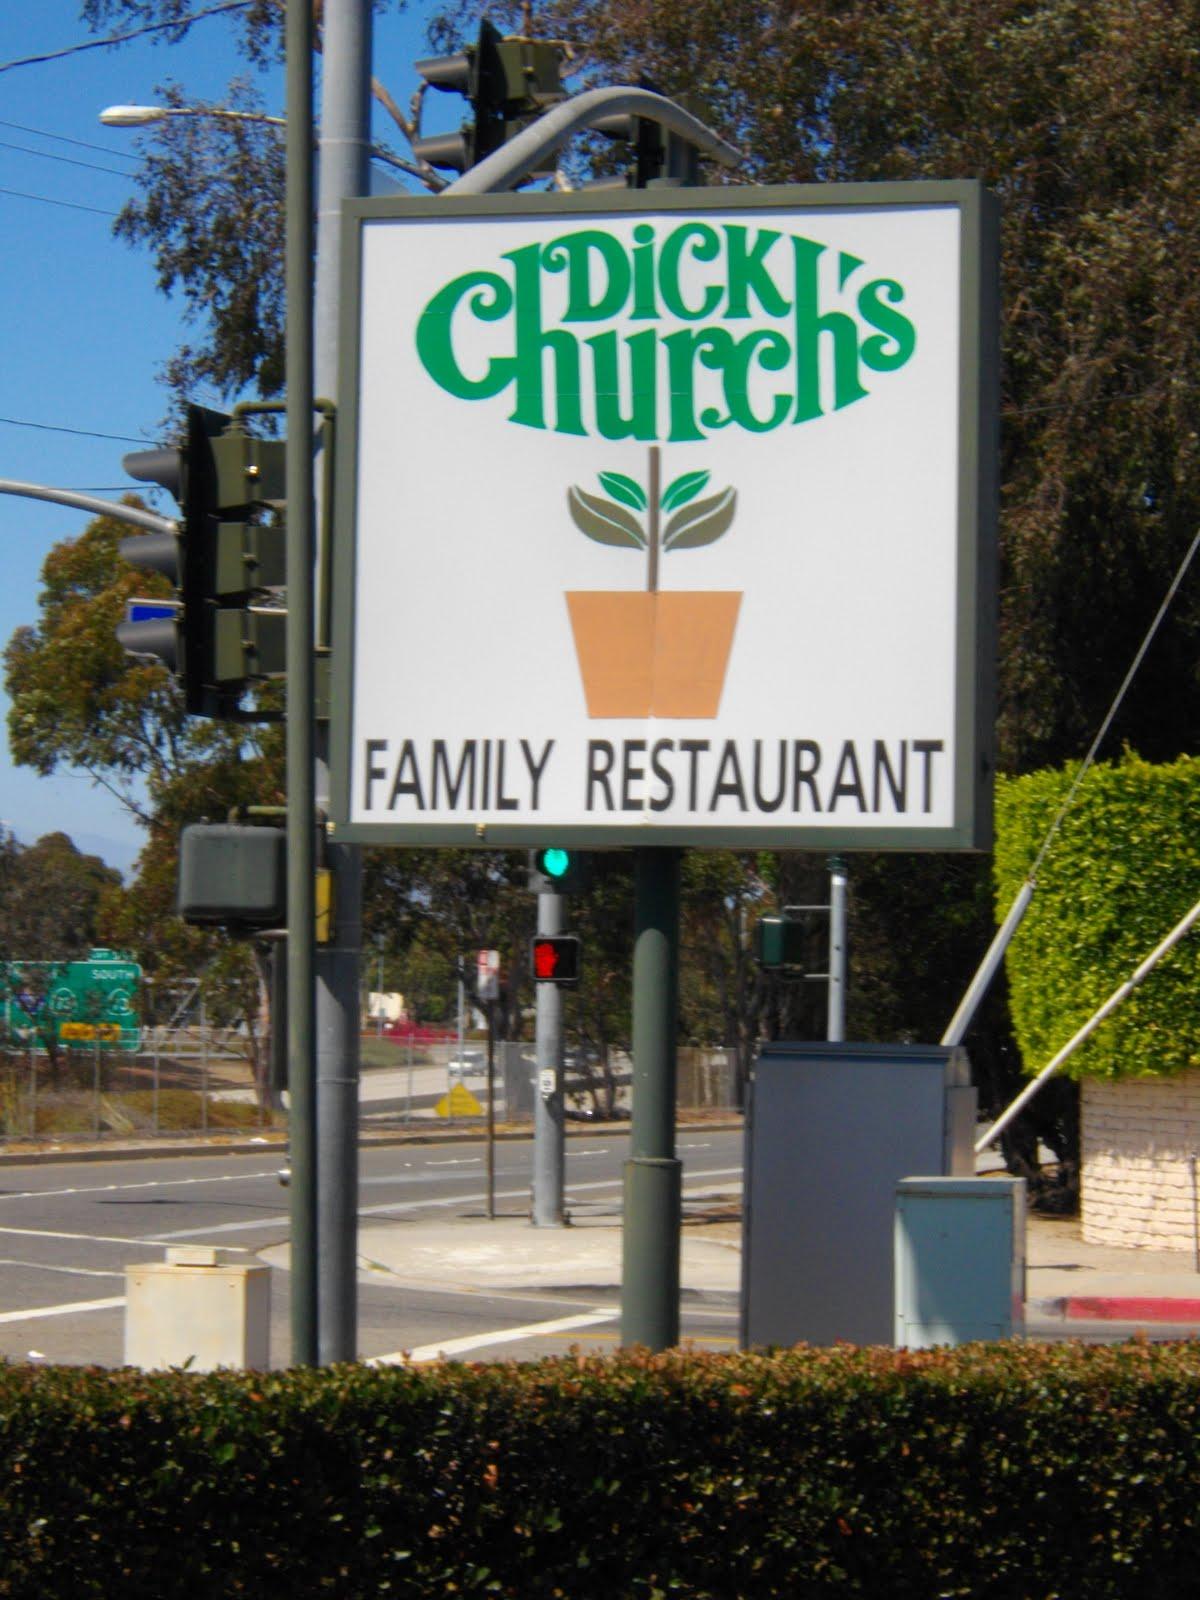 Church's with Restaurant Logo - Dinerwood: Los Angeles Diner Reviews: Dick Church's Restaurant--We ...